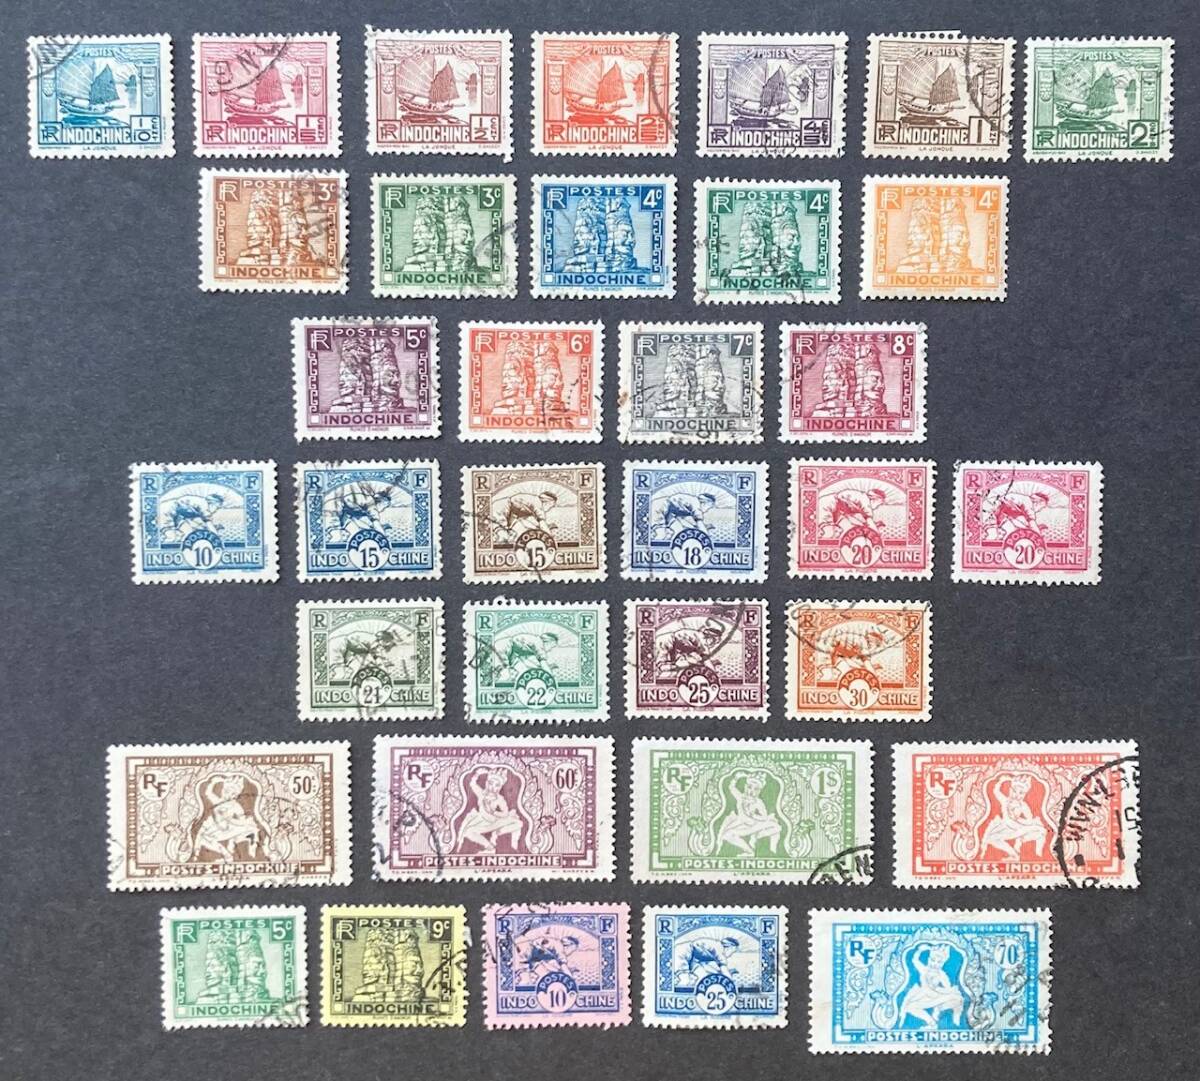 [ France . India sina]1931-1941 year ordinary stamp series all 34 kind used (..) beautiful goods * version. variety including all 35 sheets *1 sheets unused 